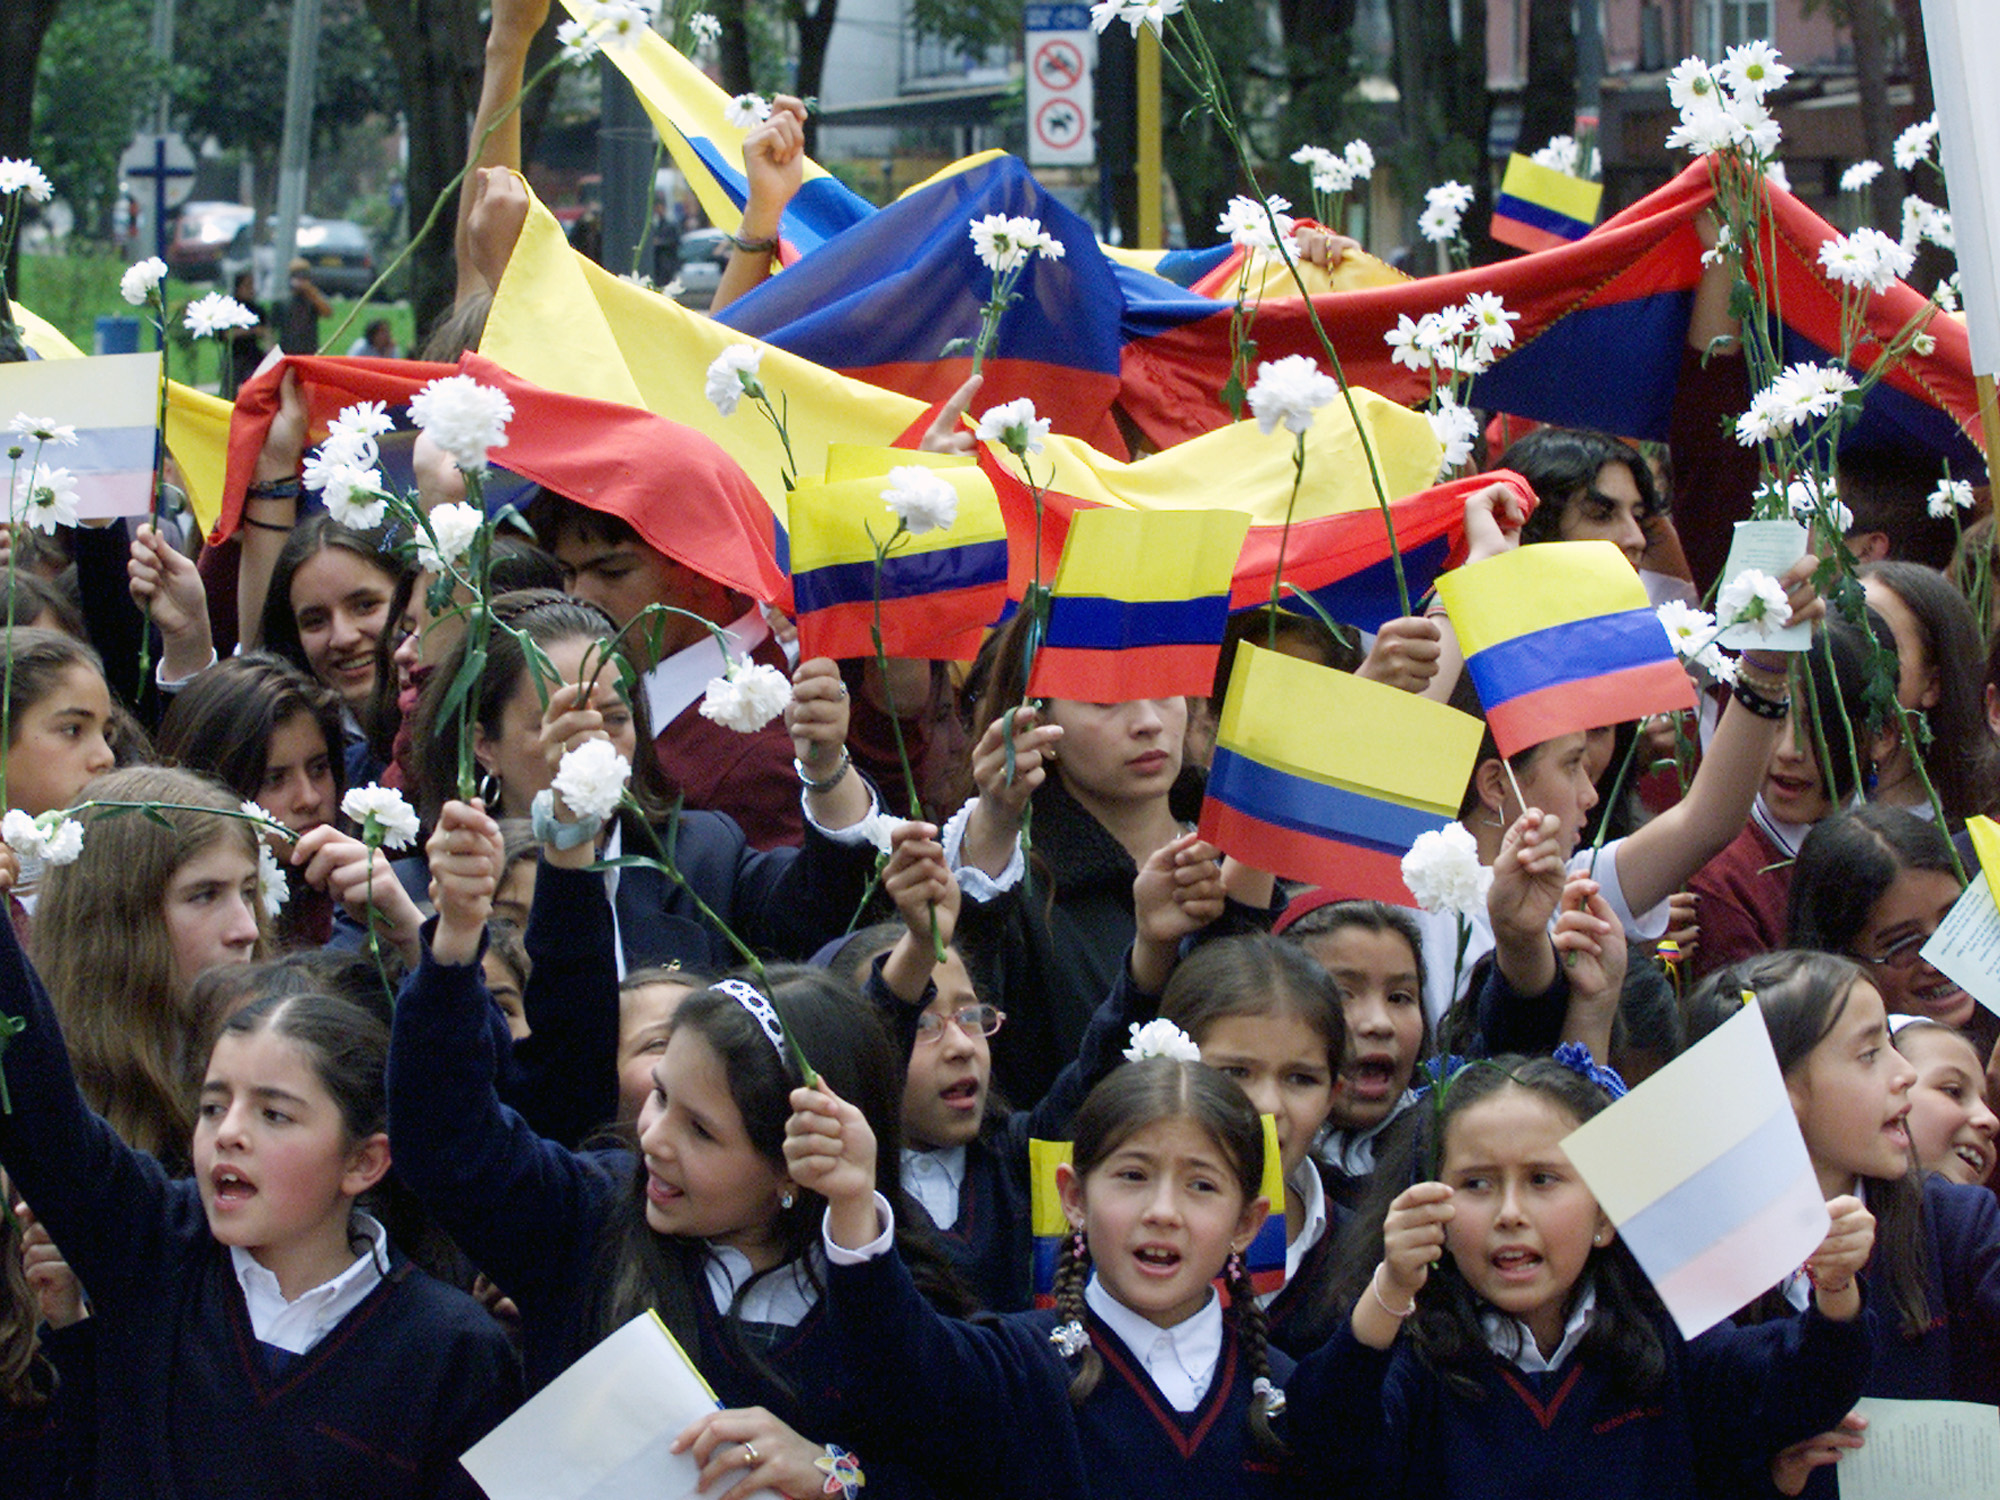 Students celebrating International Women's Day hold Colombian flags and flowers during march to demand the release of dozens of kidnapped children, Bogota.